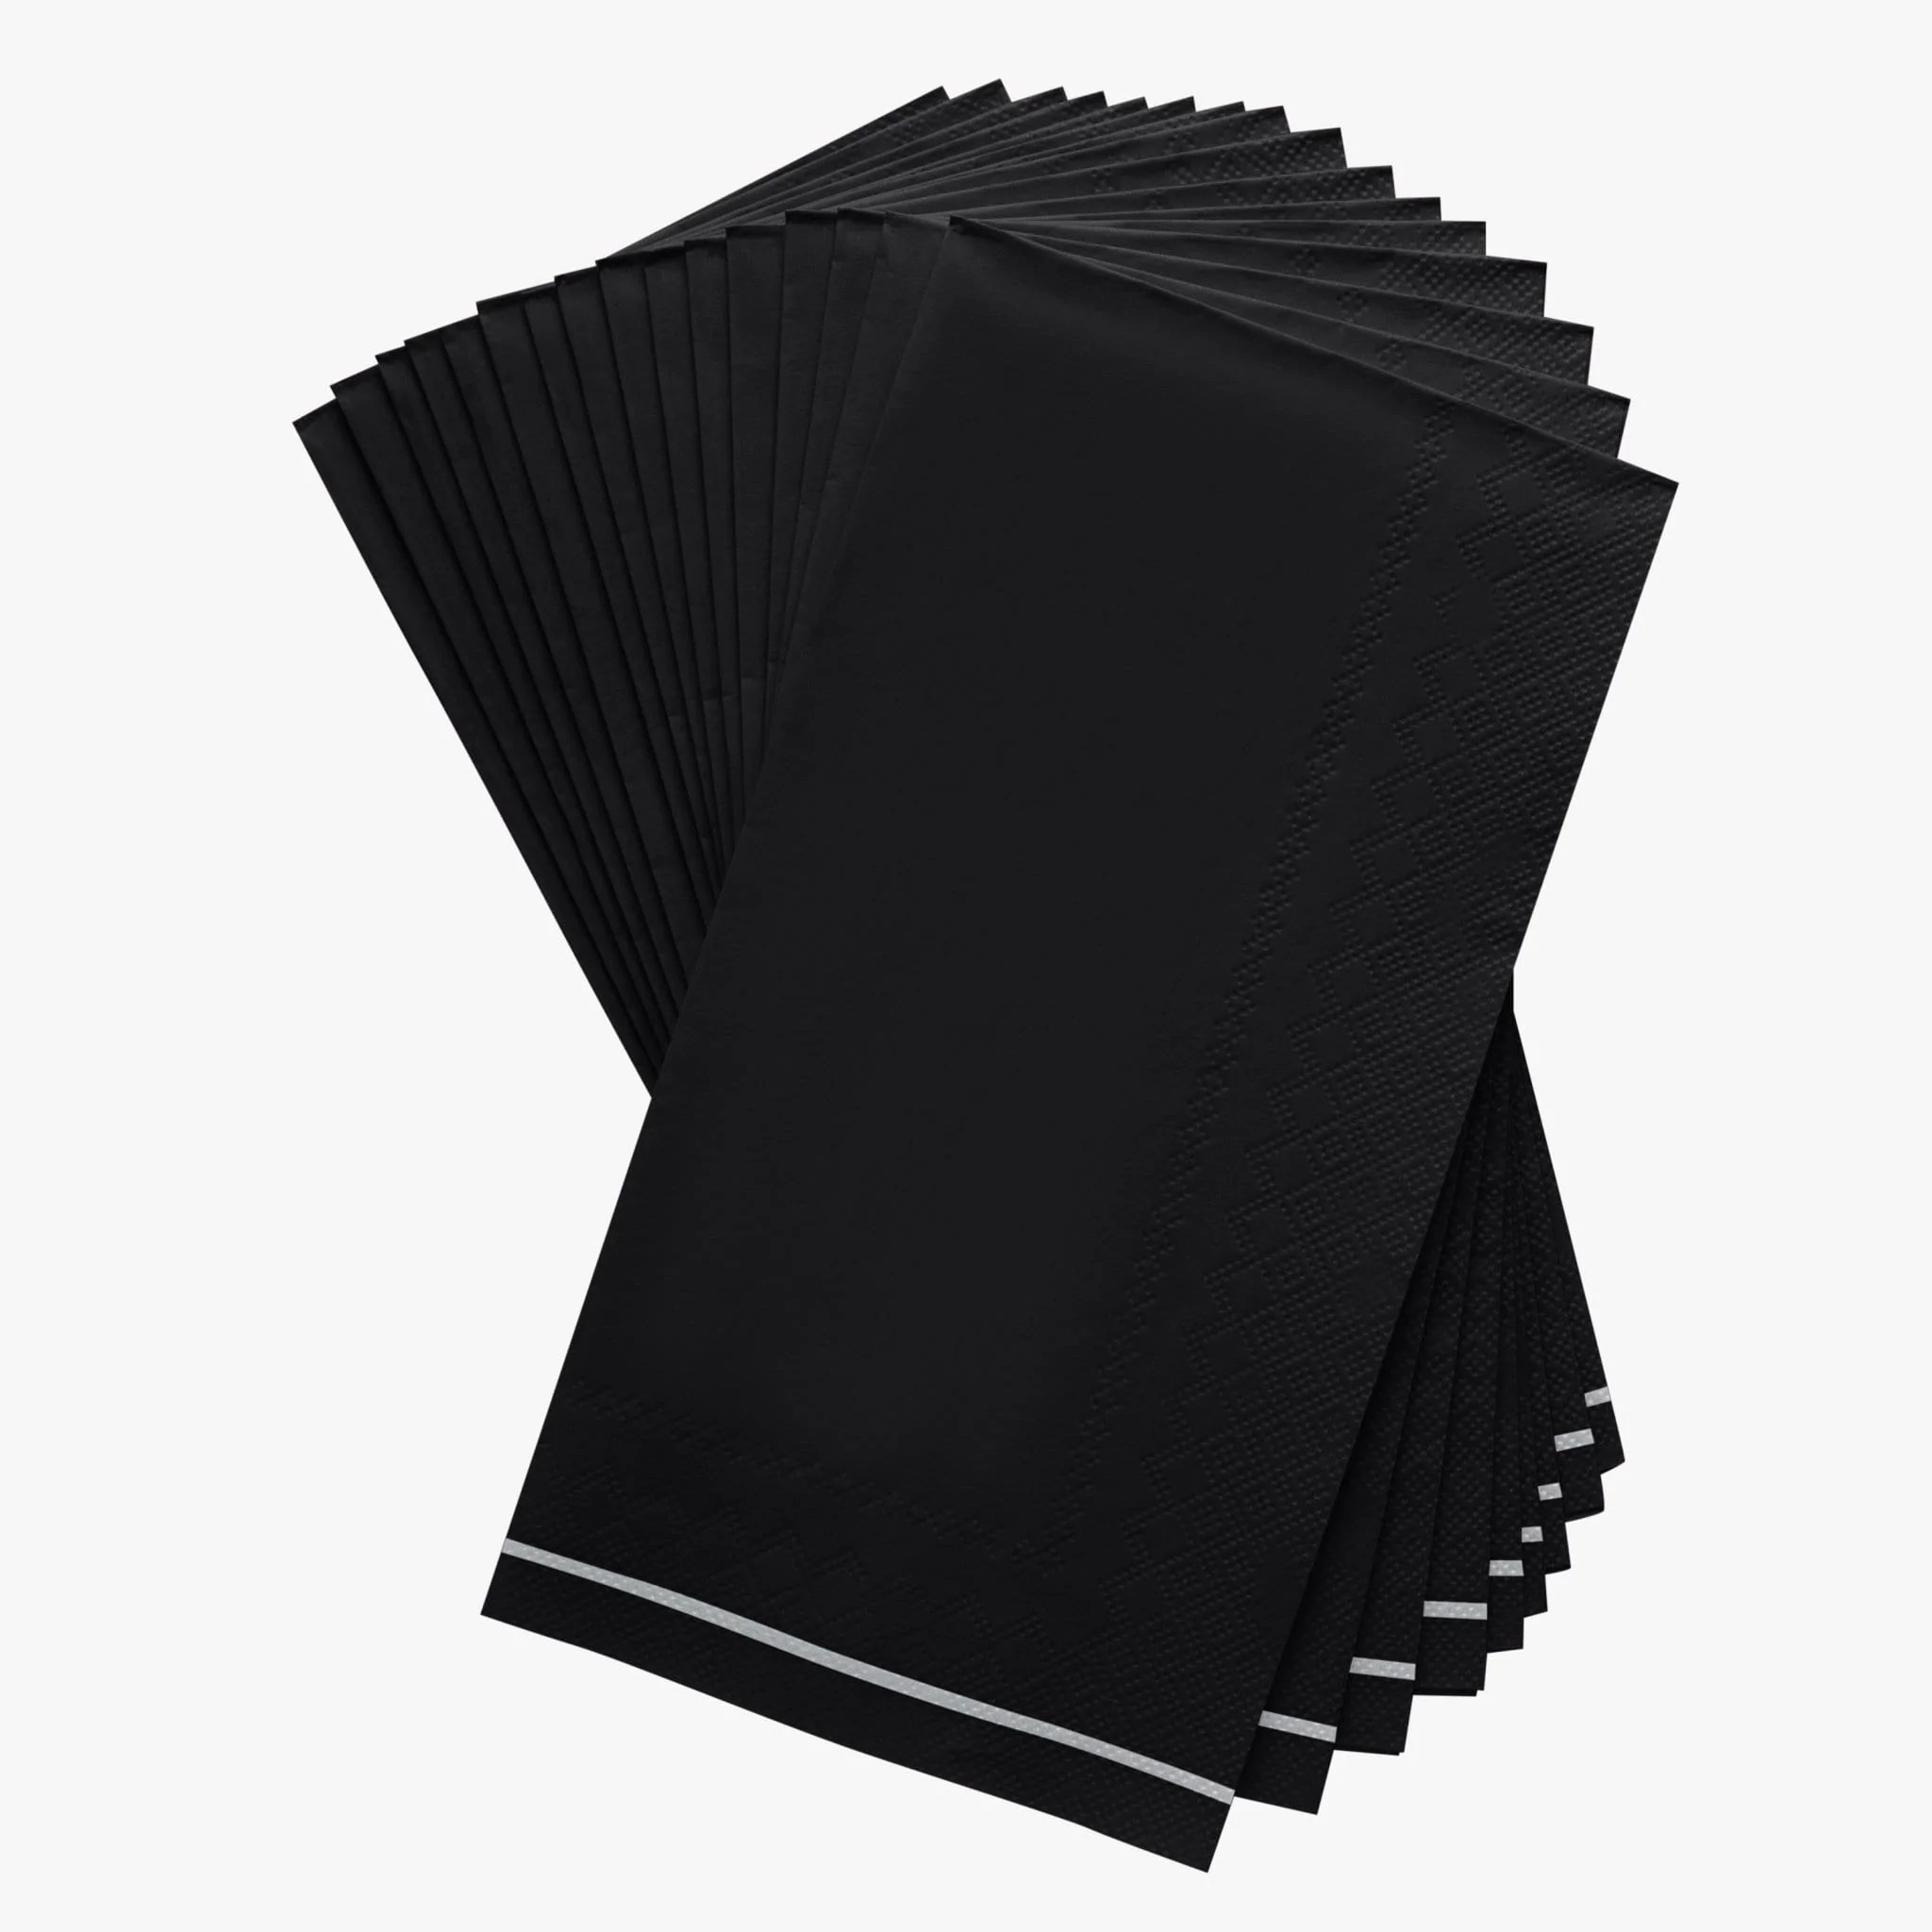 Luxe Party Black with Silver Stripe Dinner Napkins - 16 pcs